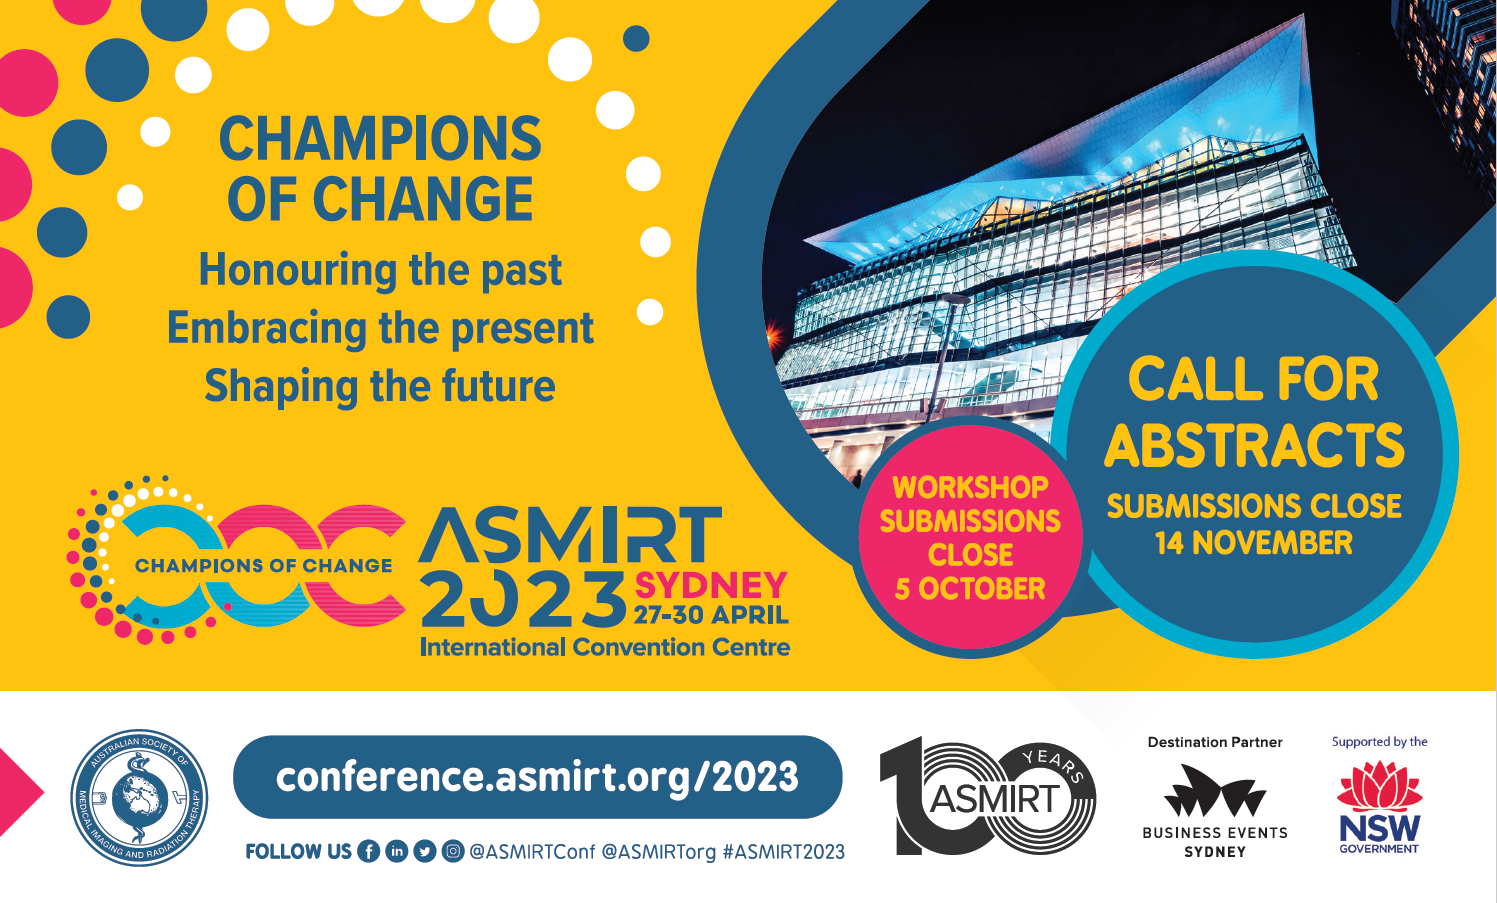 ASMIRT 2023 - call for Workshop submissions and Abstracts